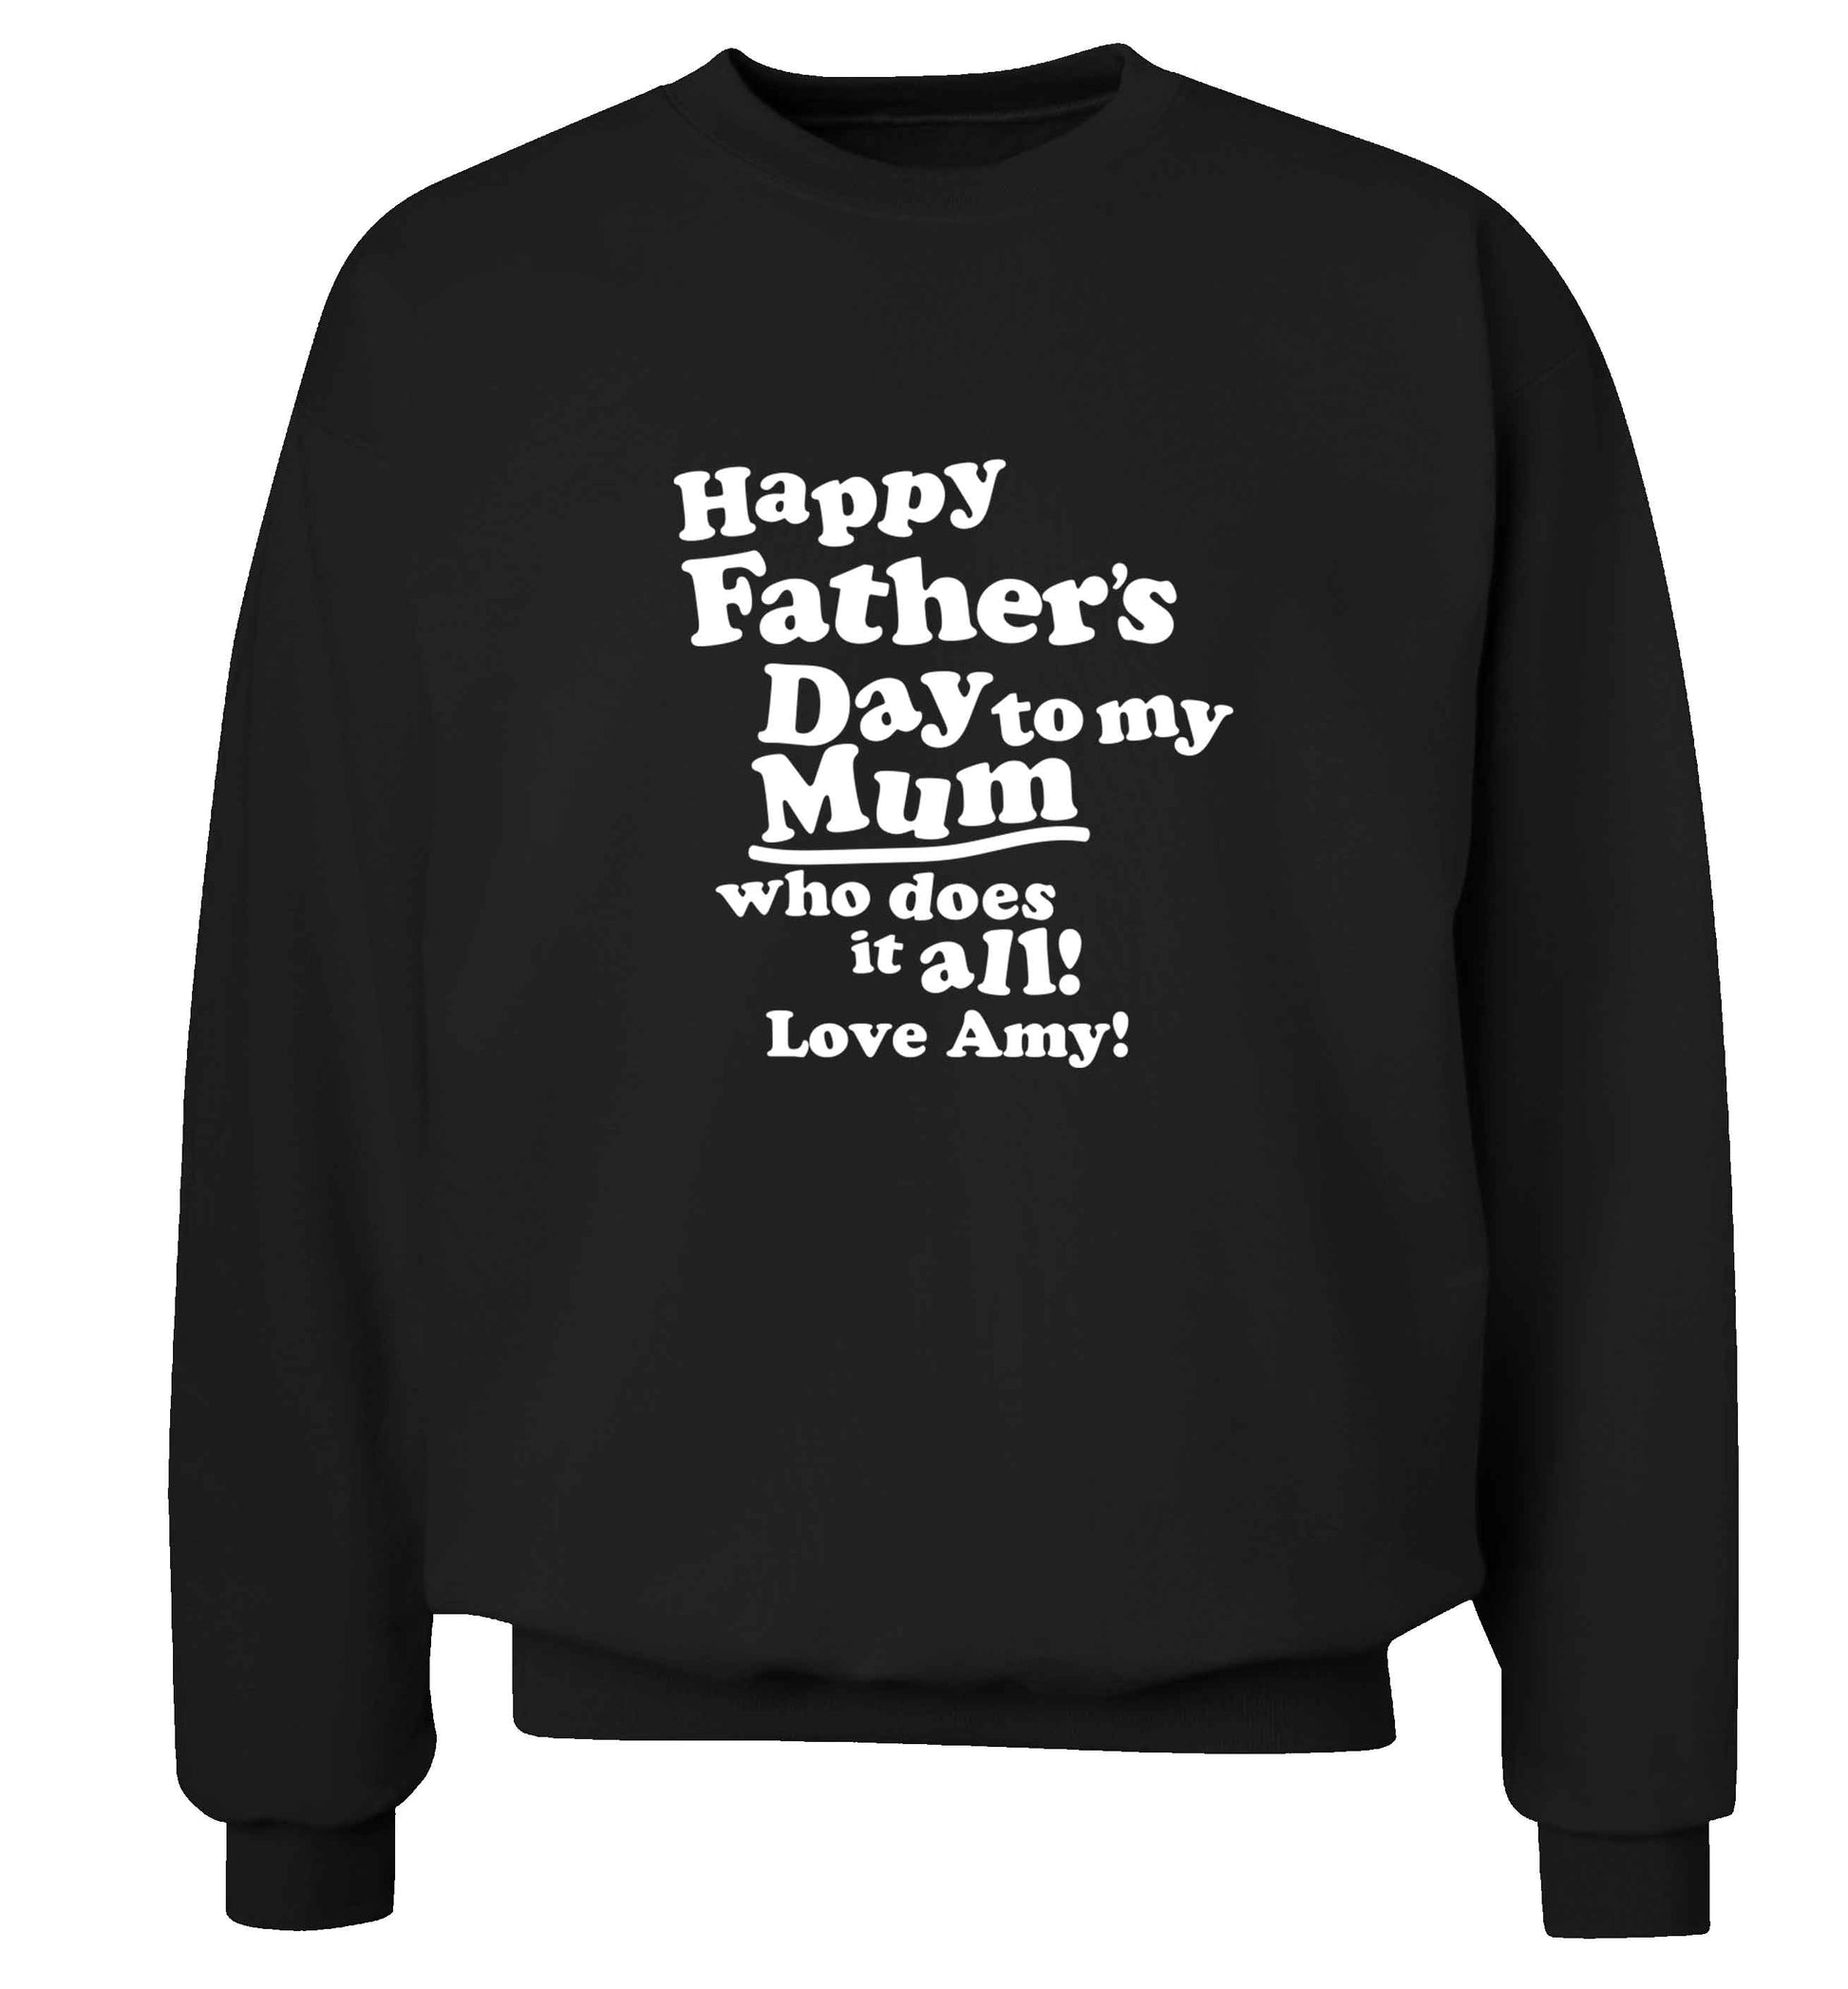 Happy Father's day to my mum who does it all adult's unisex black sweater 2XL